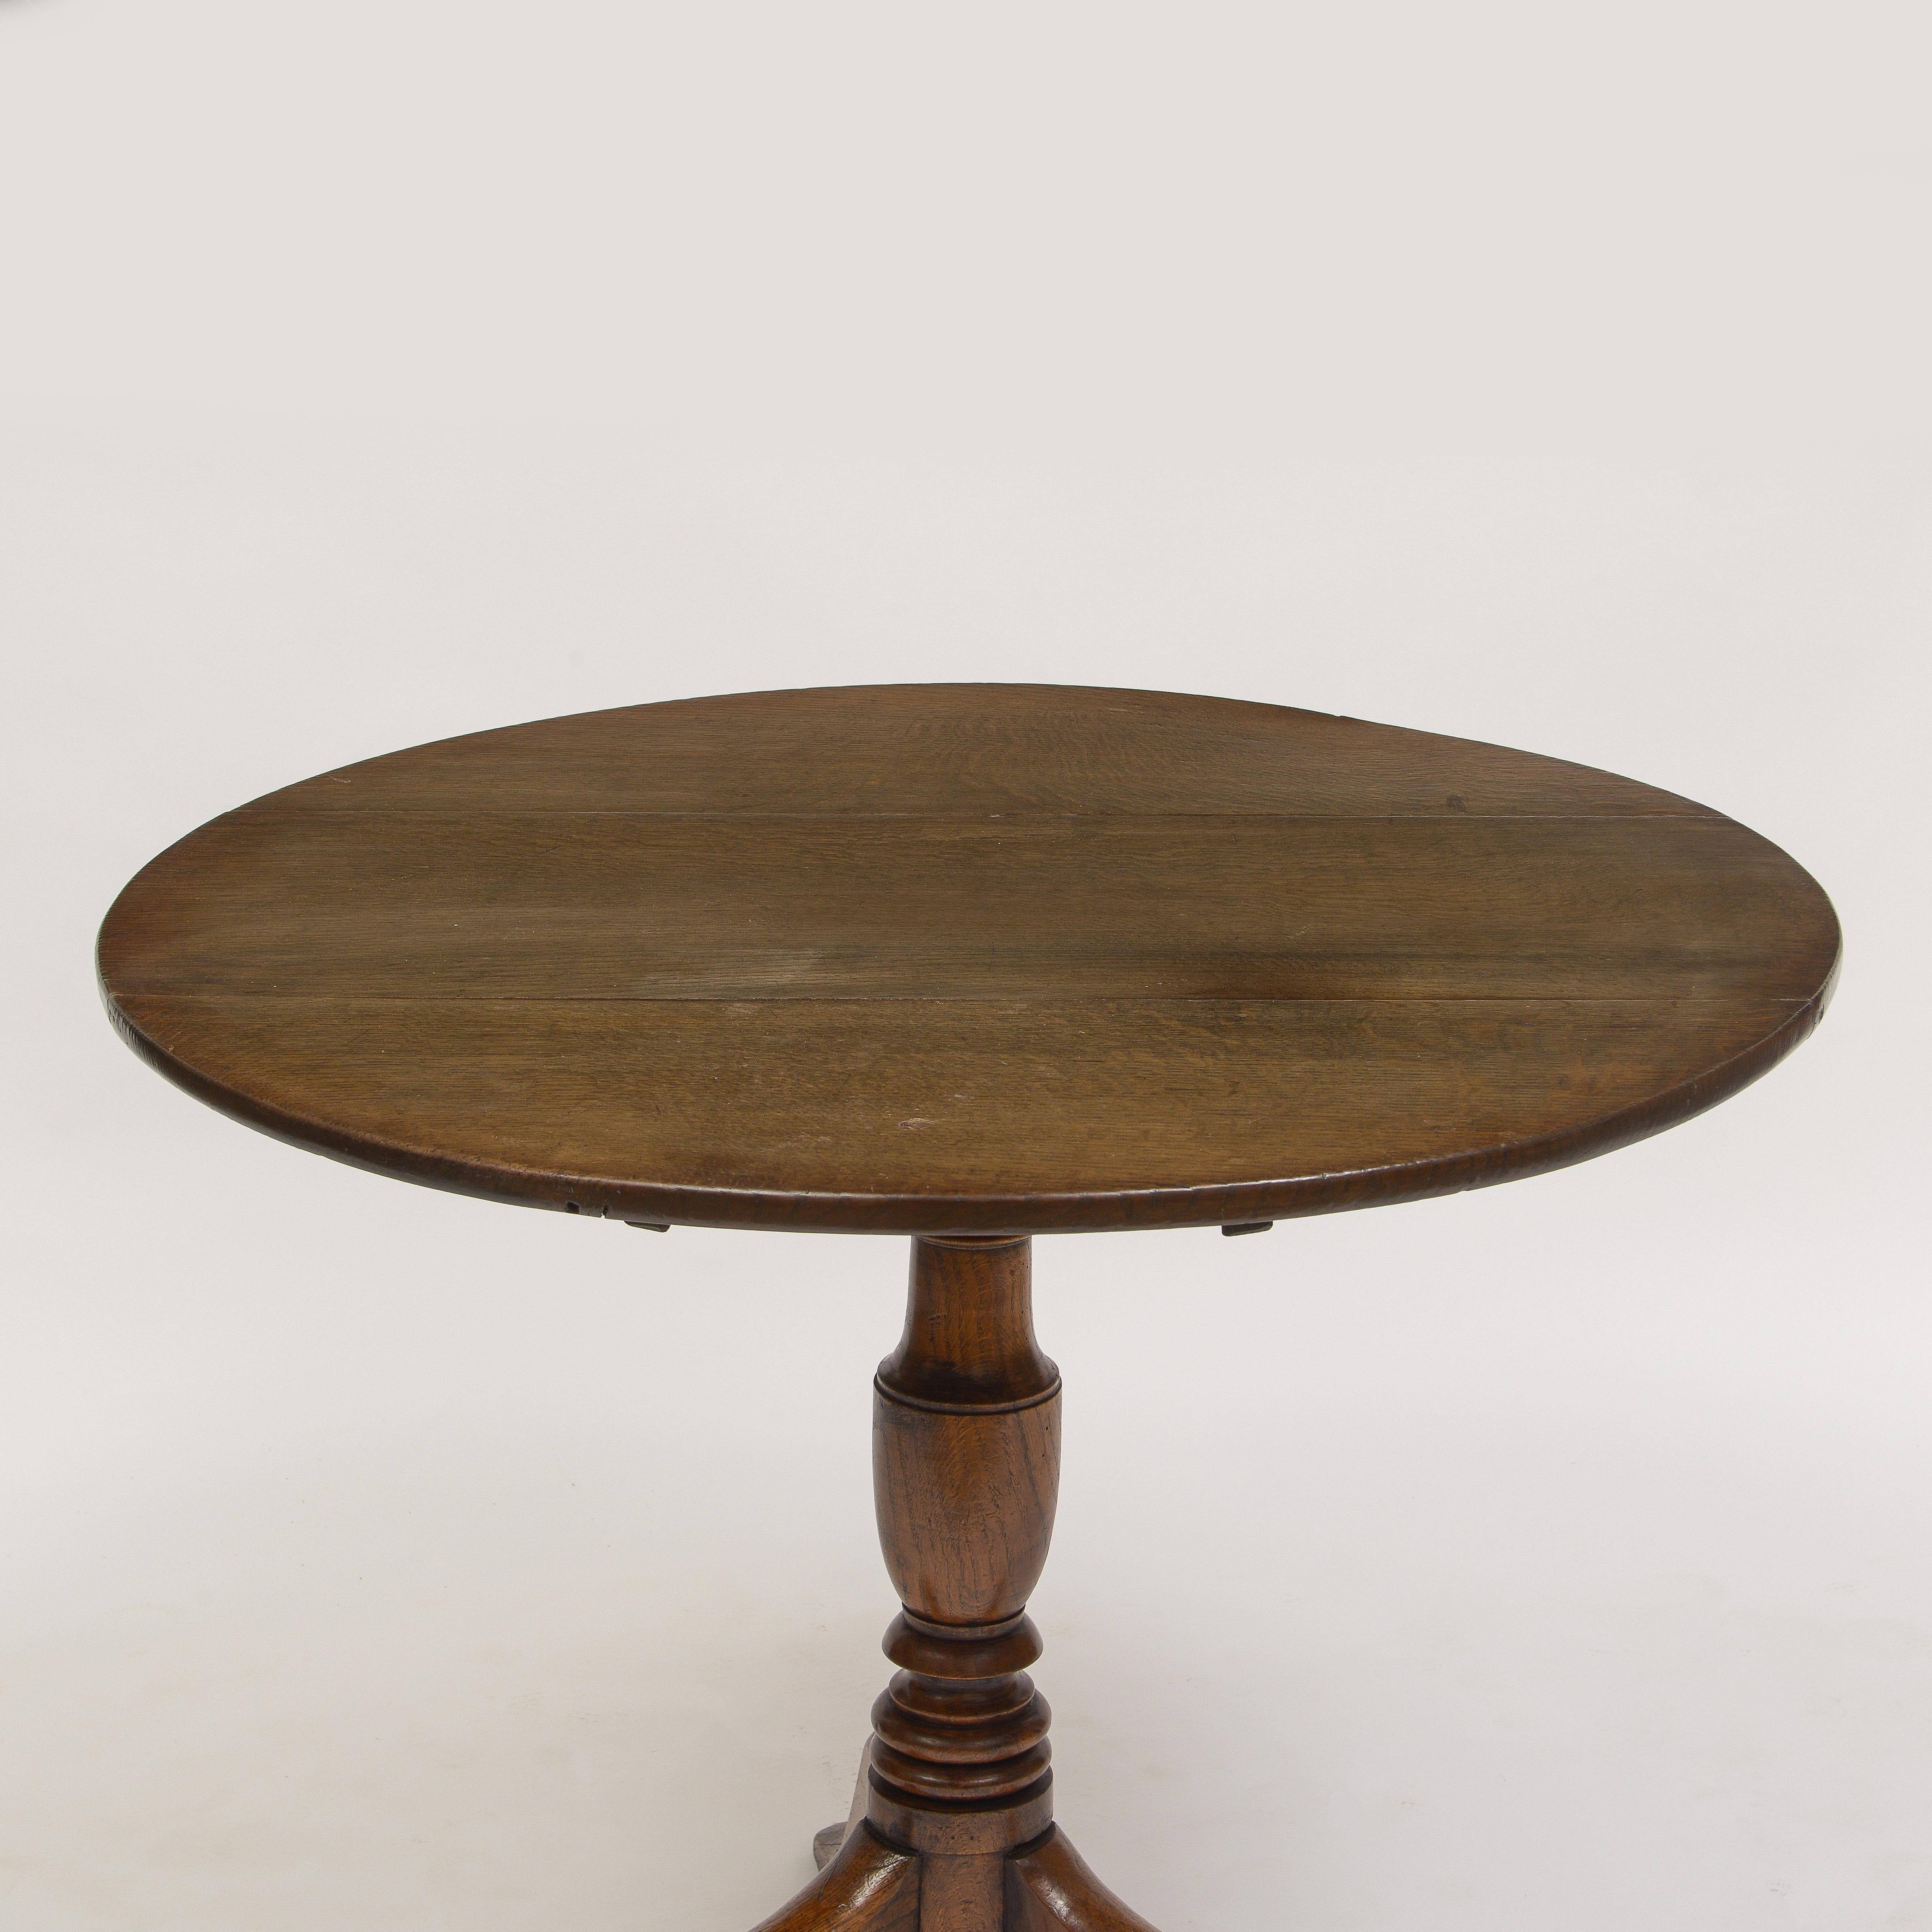 Beautiful bleached brown oak top with appropriate patina
Supported by a turned pedestal and three legs in the shape of human legs with shoes.